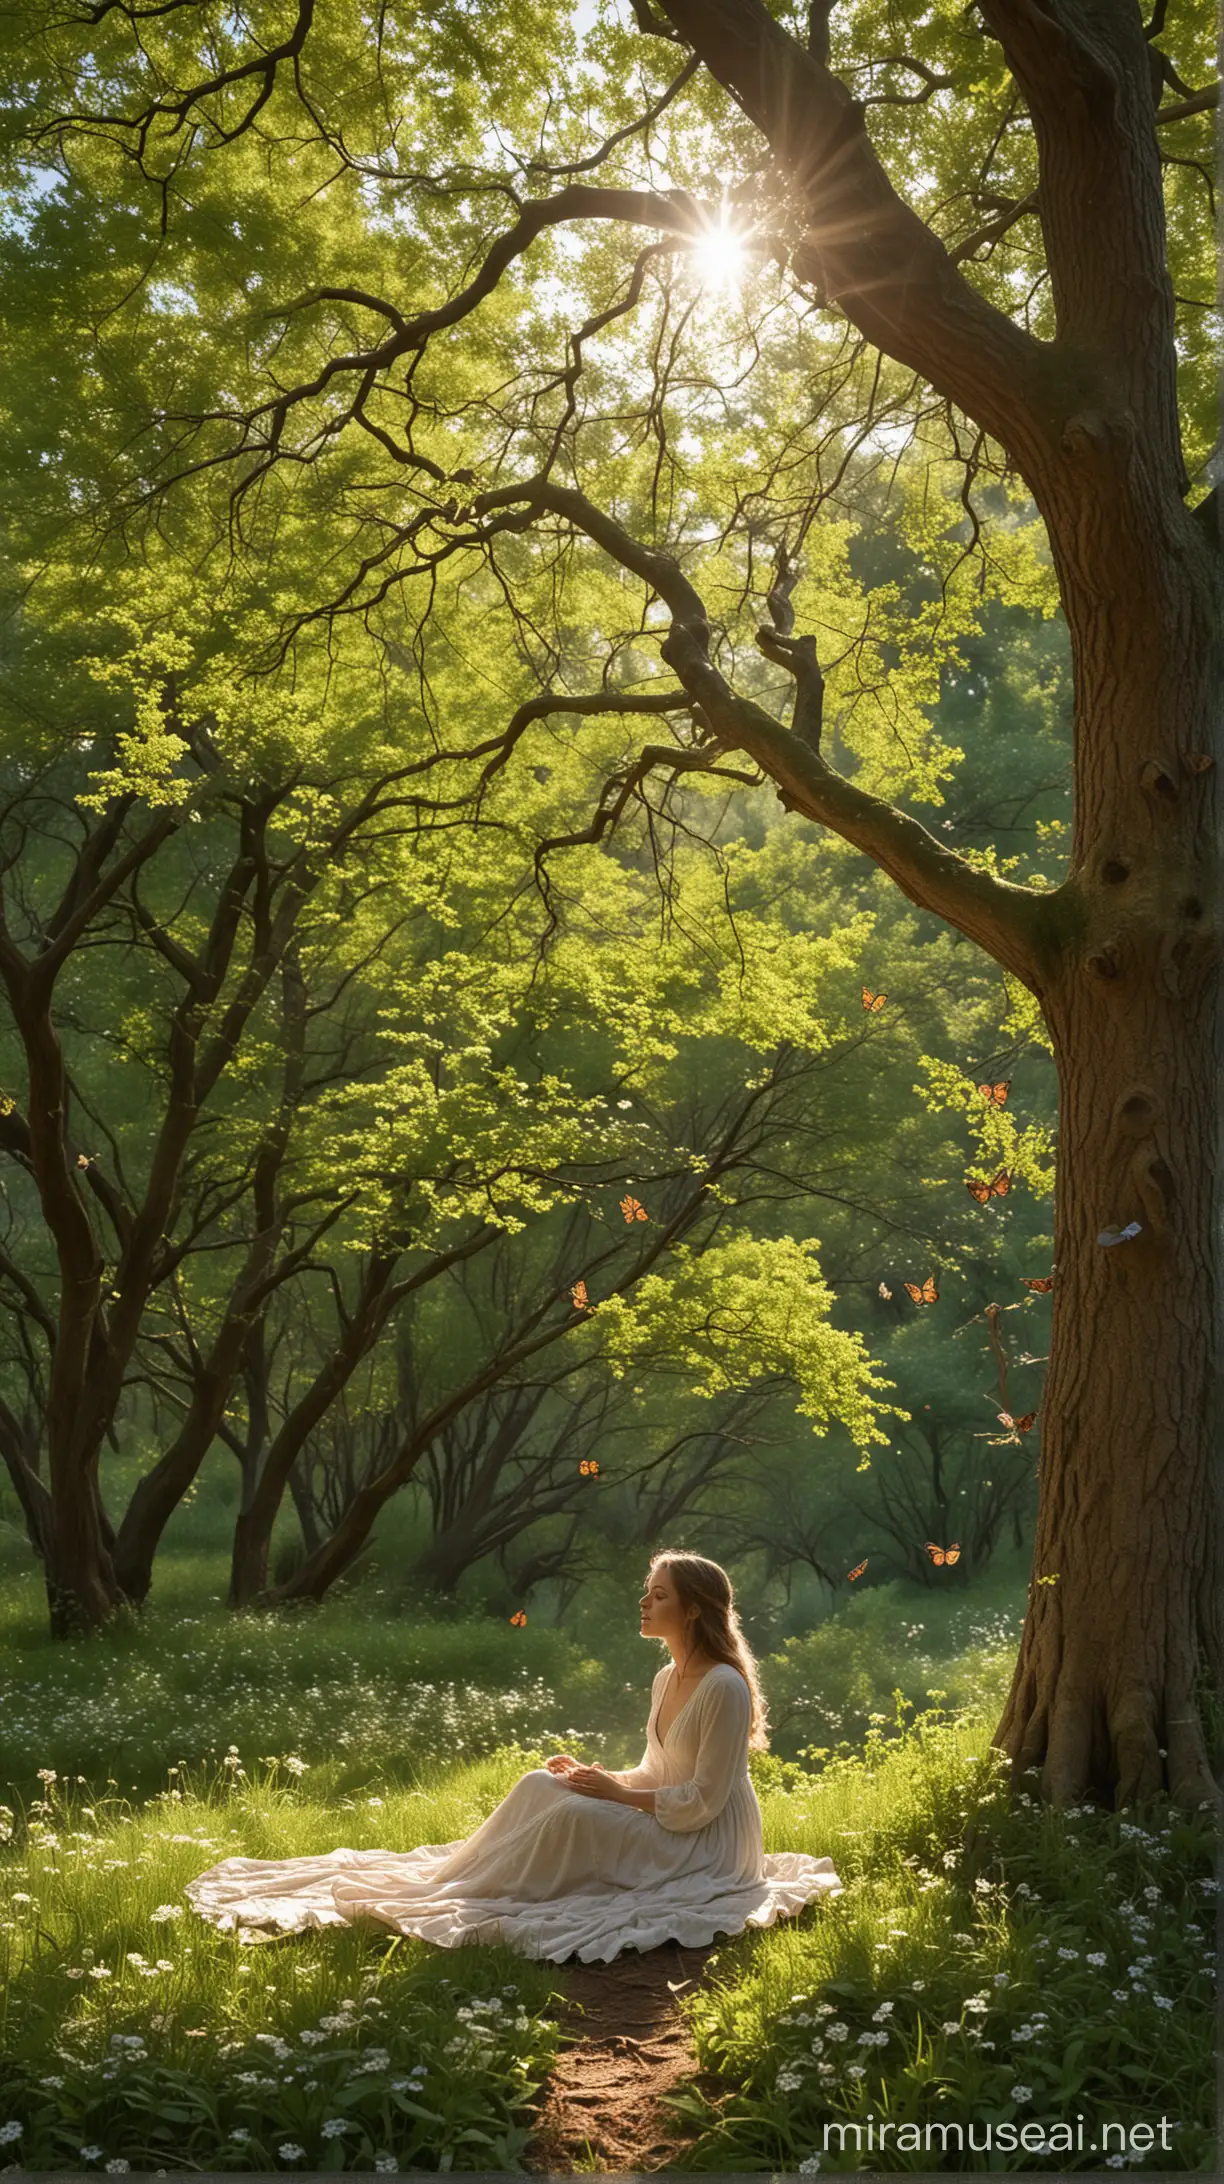 In an utopian forest filled with ancient oaks, a young woman sits under one of the trees, daydreaming. The scene is serene and idyllic, bathed in sunlight that filters through the leaves, creating patterns of light and shadow on the forest floor. Surrounding the woman are wildflowers, with butterflies gently floating in the air, and the distant sound of a spring brook can be heard. The atmosphere conveys a sense of peace and dreaminess, encapsulating the woman's simple, yet profound dreams amidst the beauty of nature.